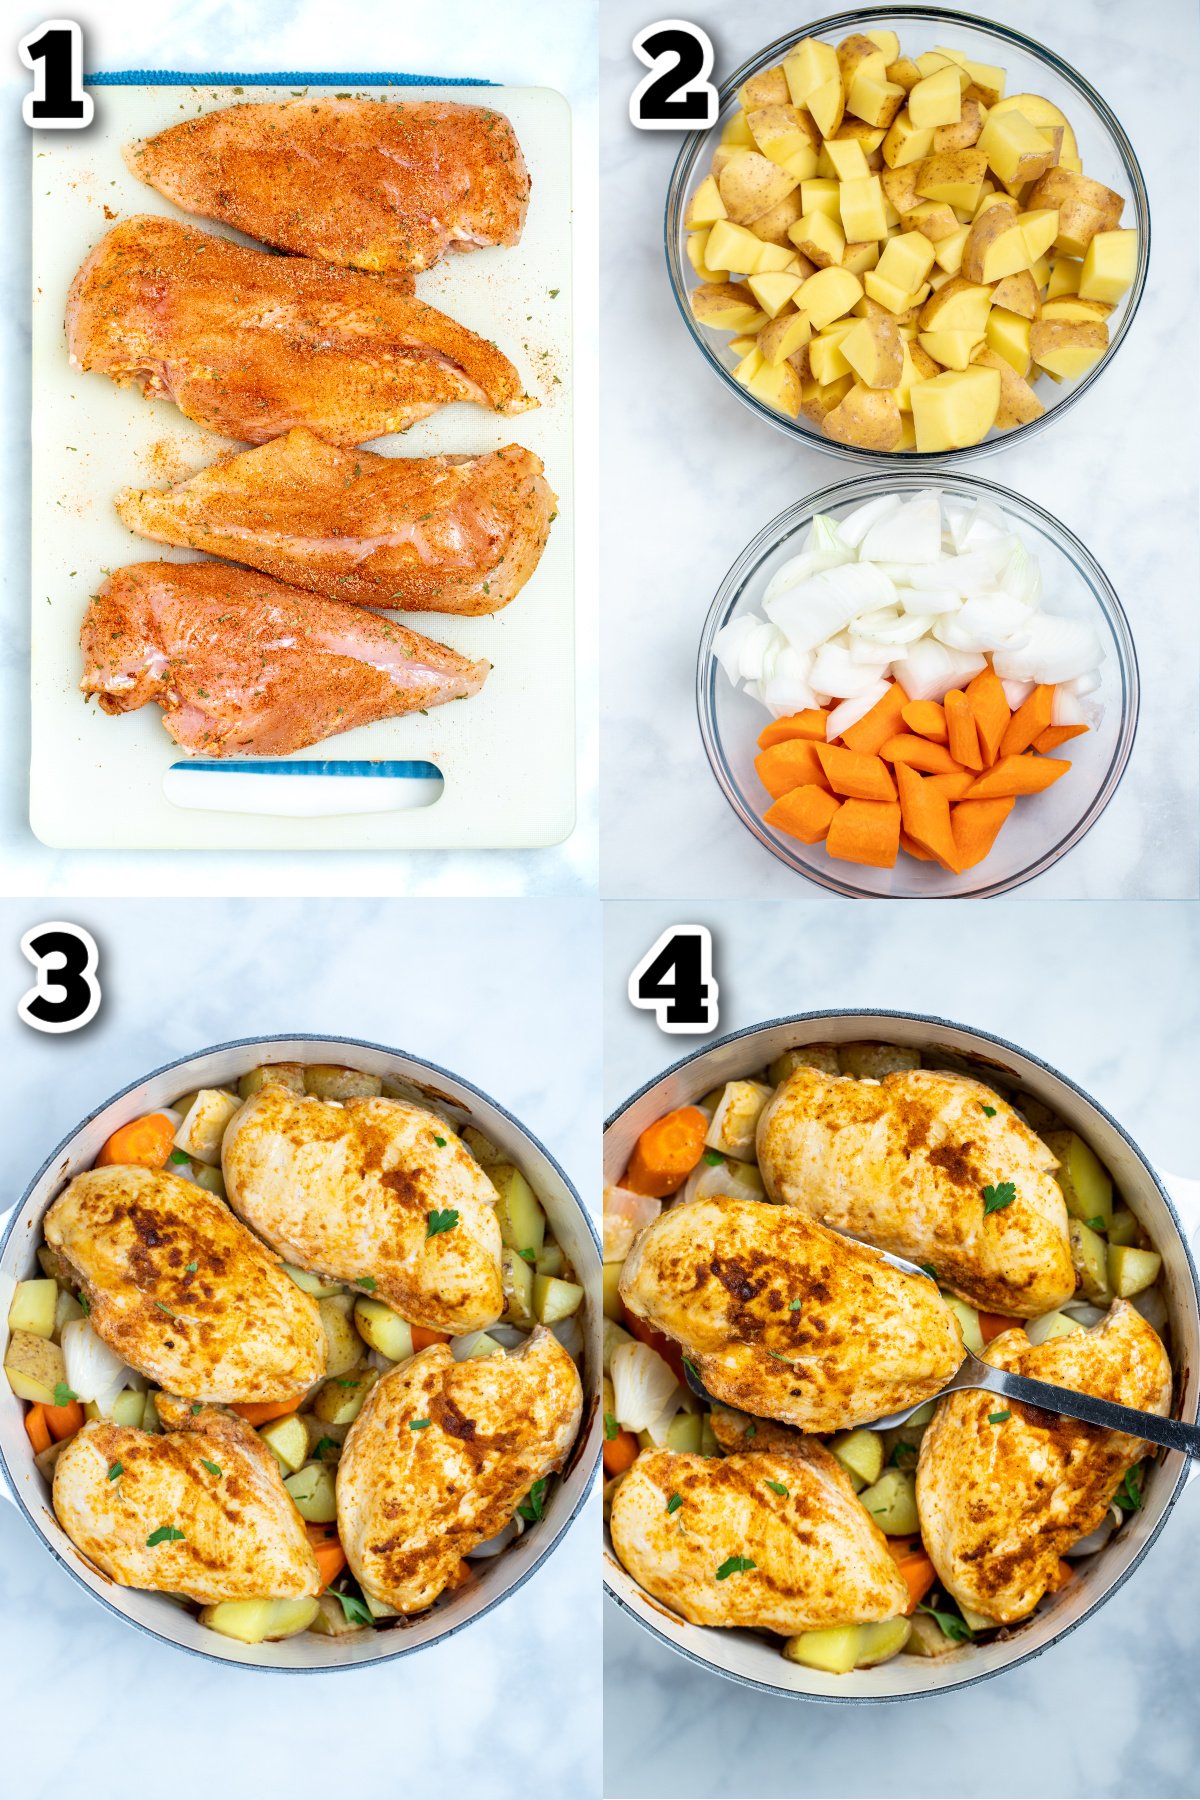 Step by step photos for how to make dutch oven chicken breast.